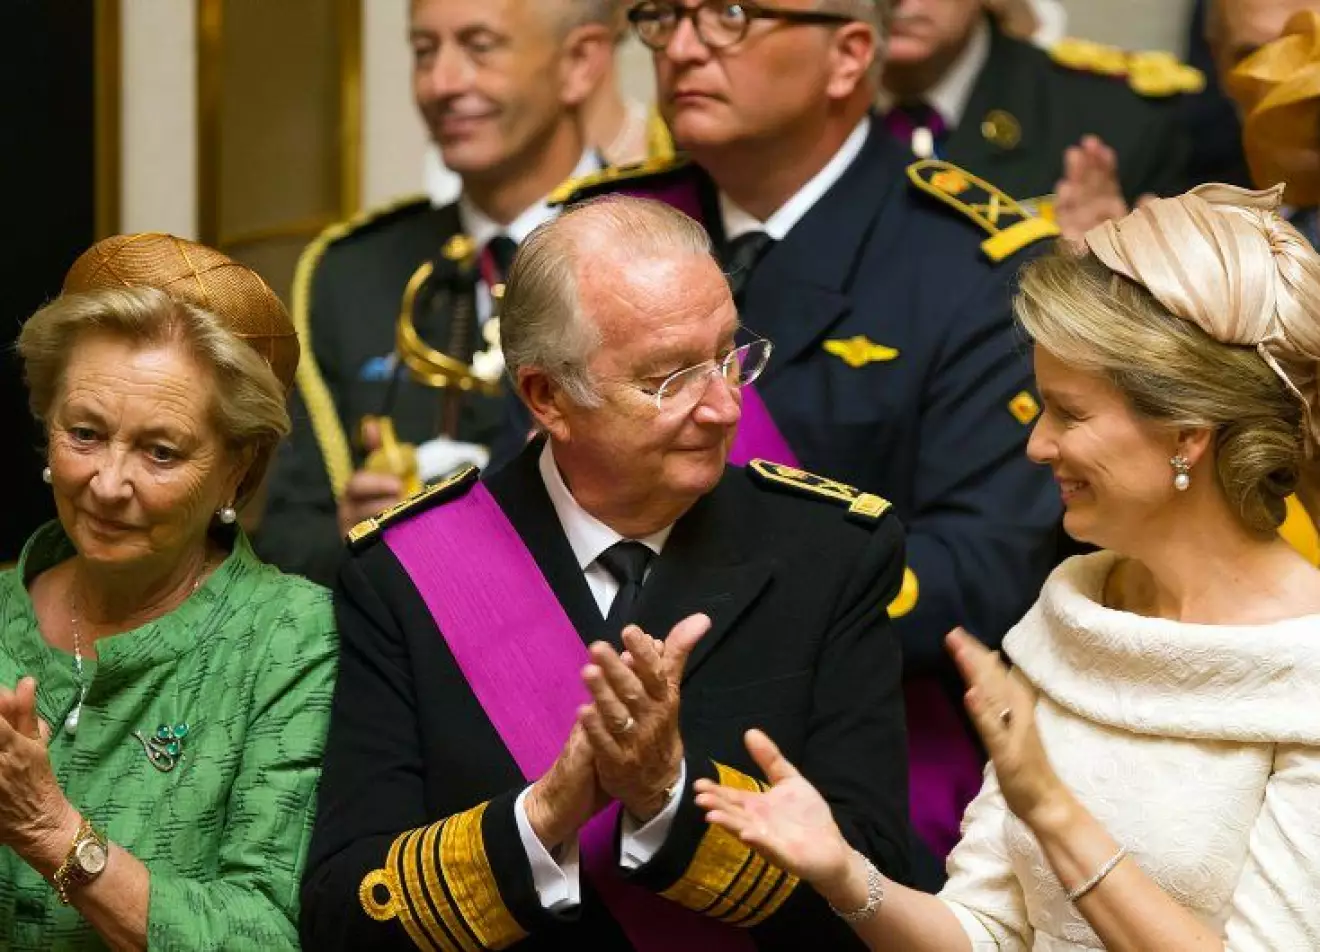 Abdication of King Albert and Investiture of King Philippe